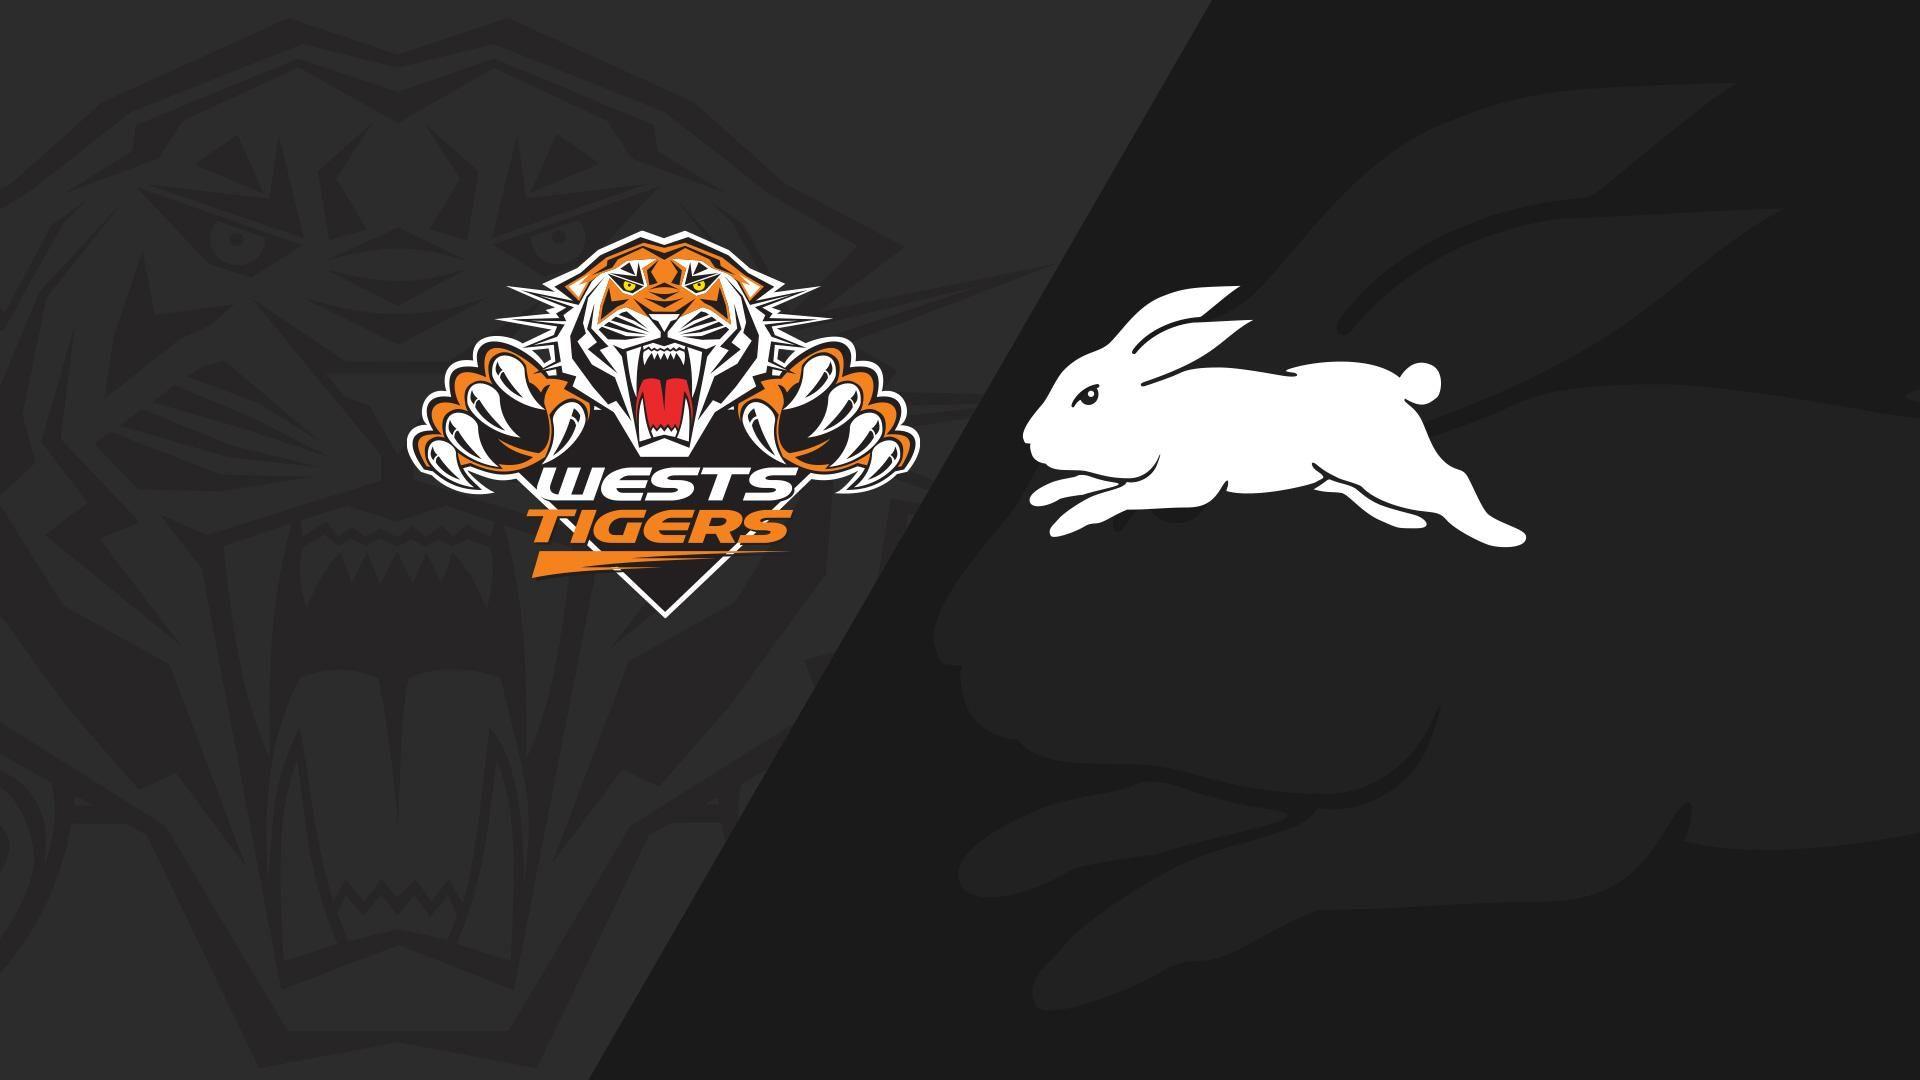 Full Match Replay: Wests Tigers v Rabbitohs 2018